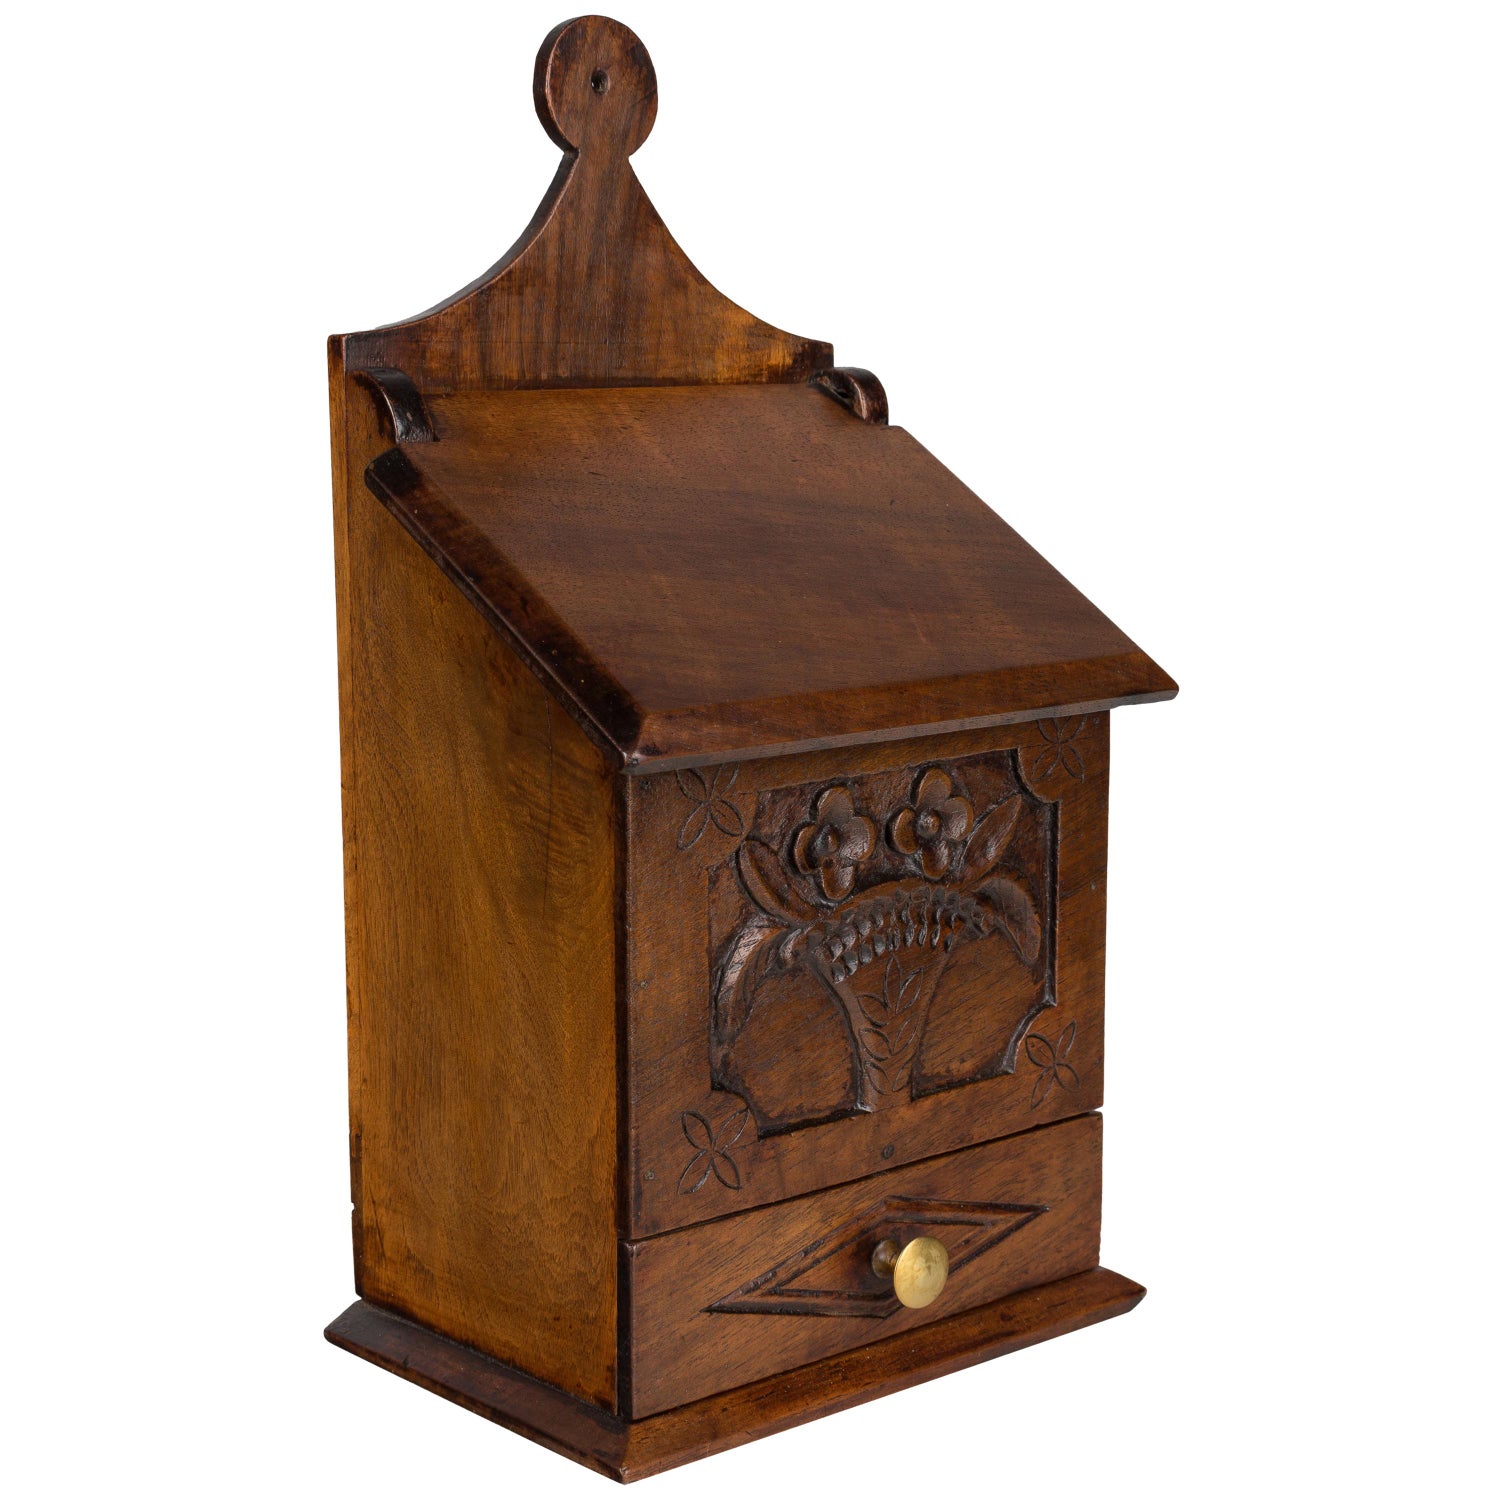 19th Century French Boite à Sel or Salt Box For Sale at 1stDibs